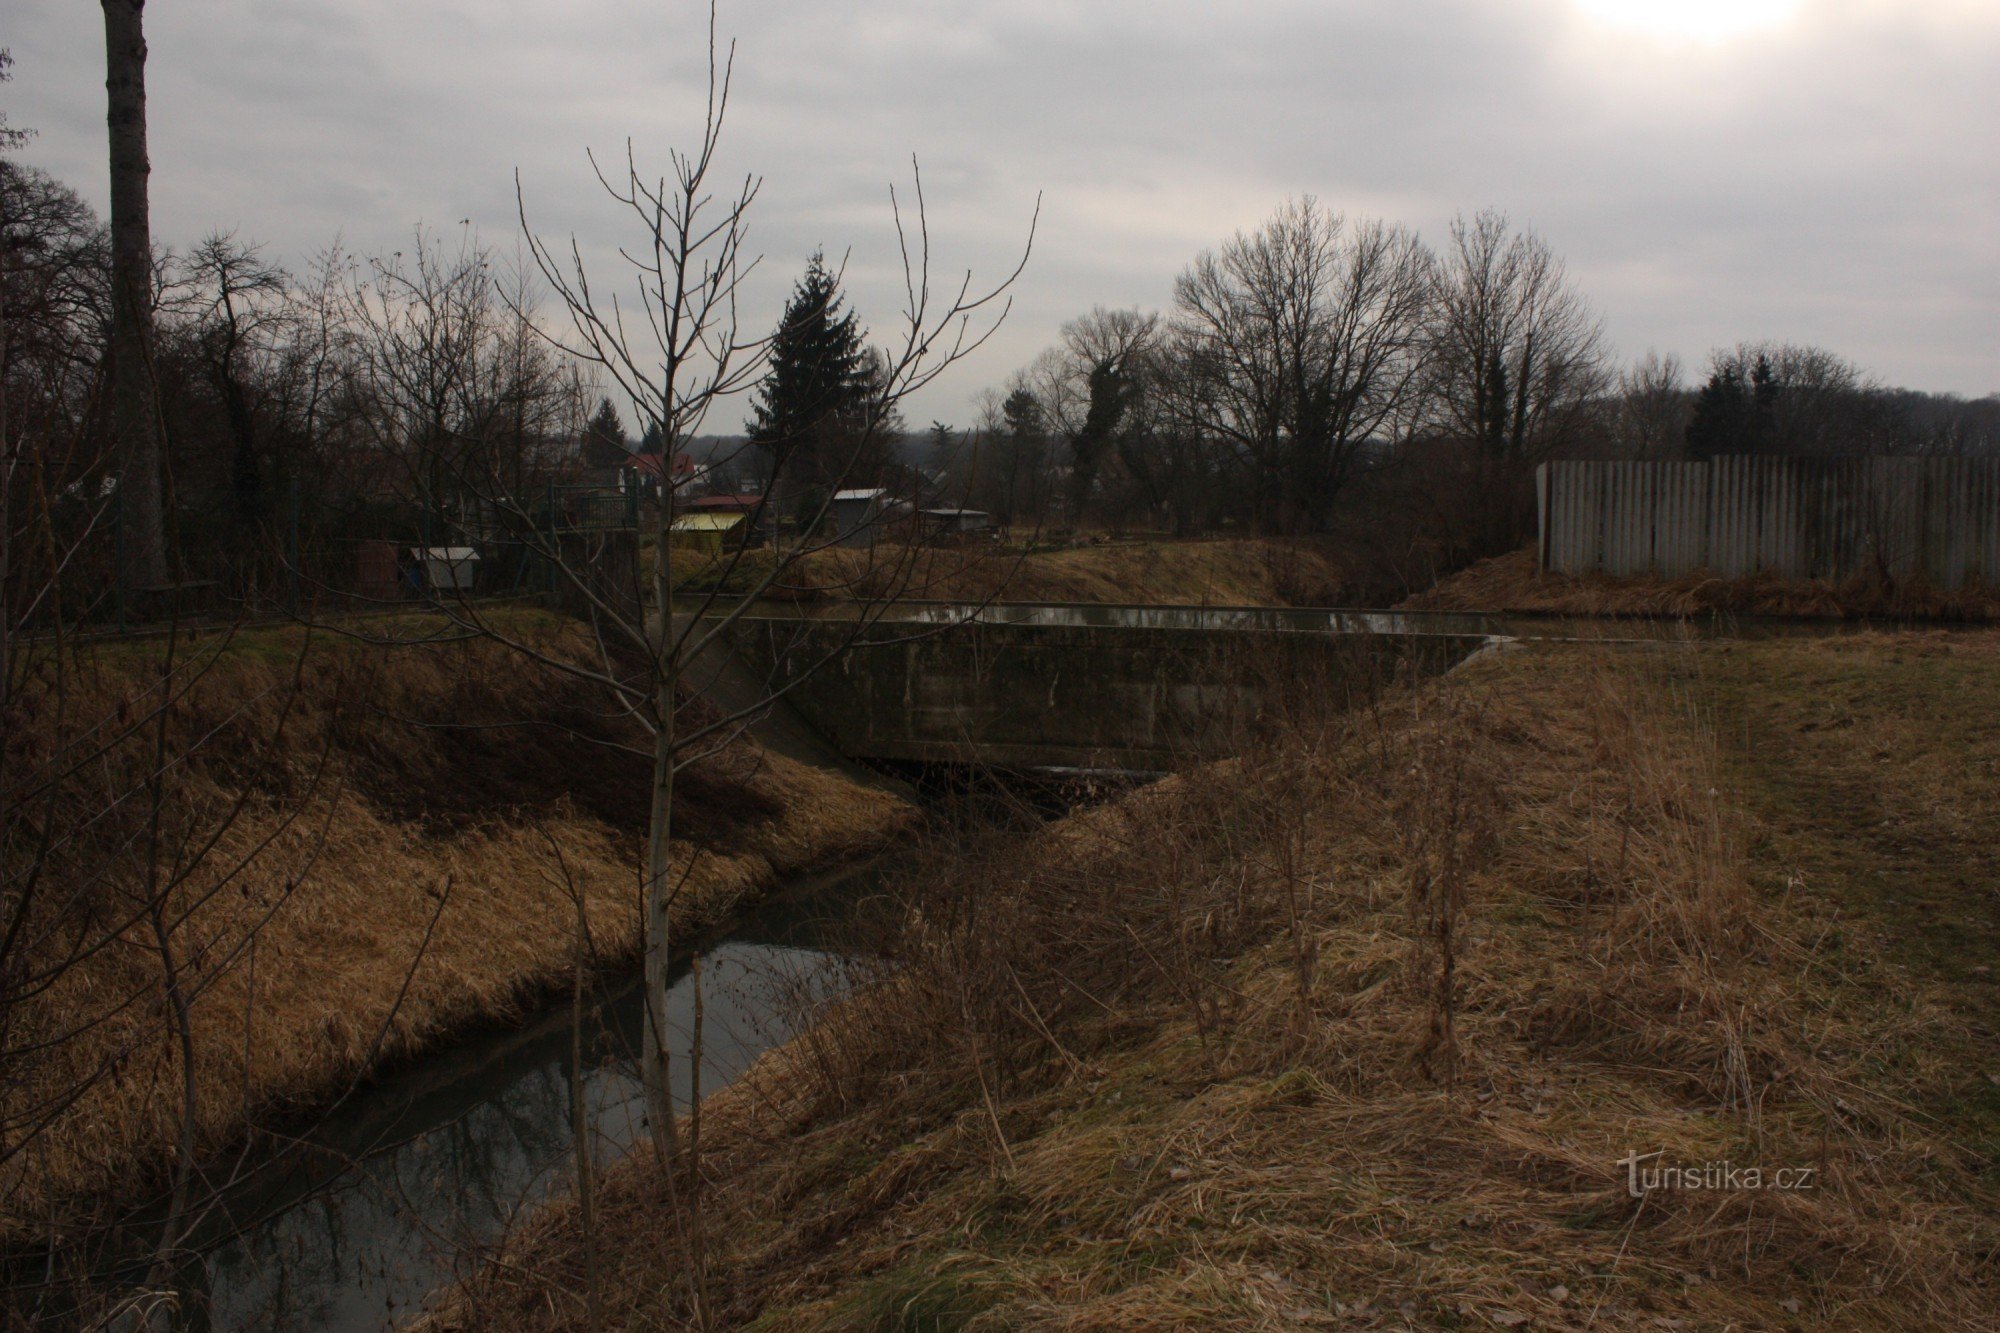 Off-level crossing of the Svodnice stream with a mill drive